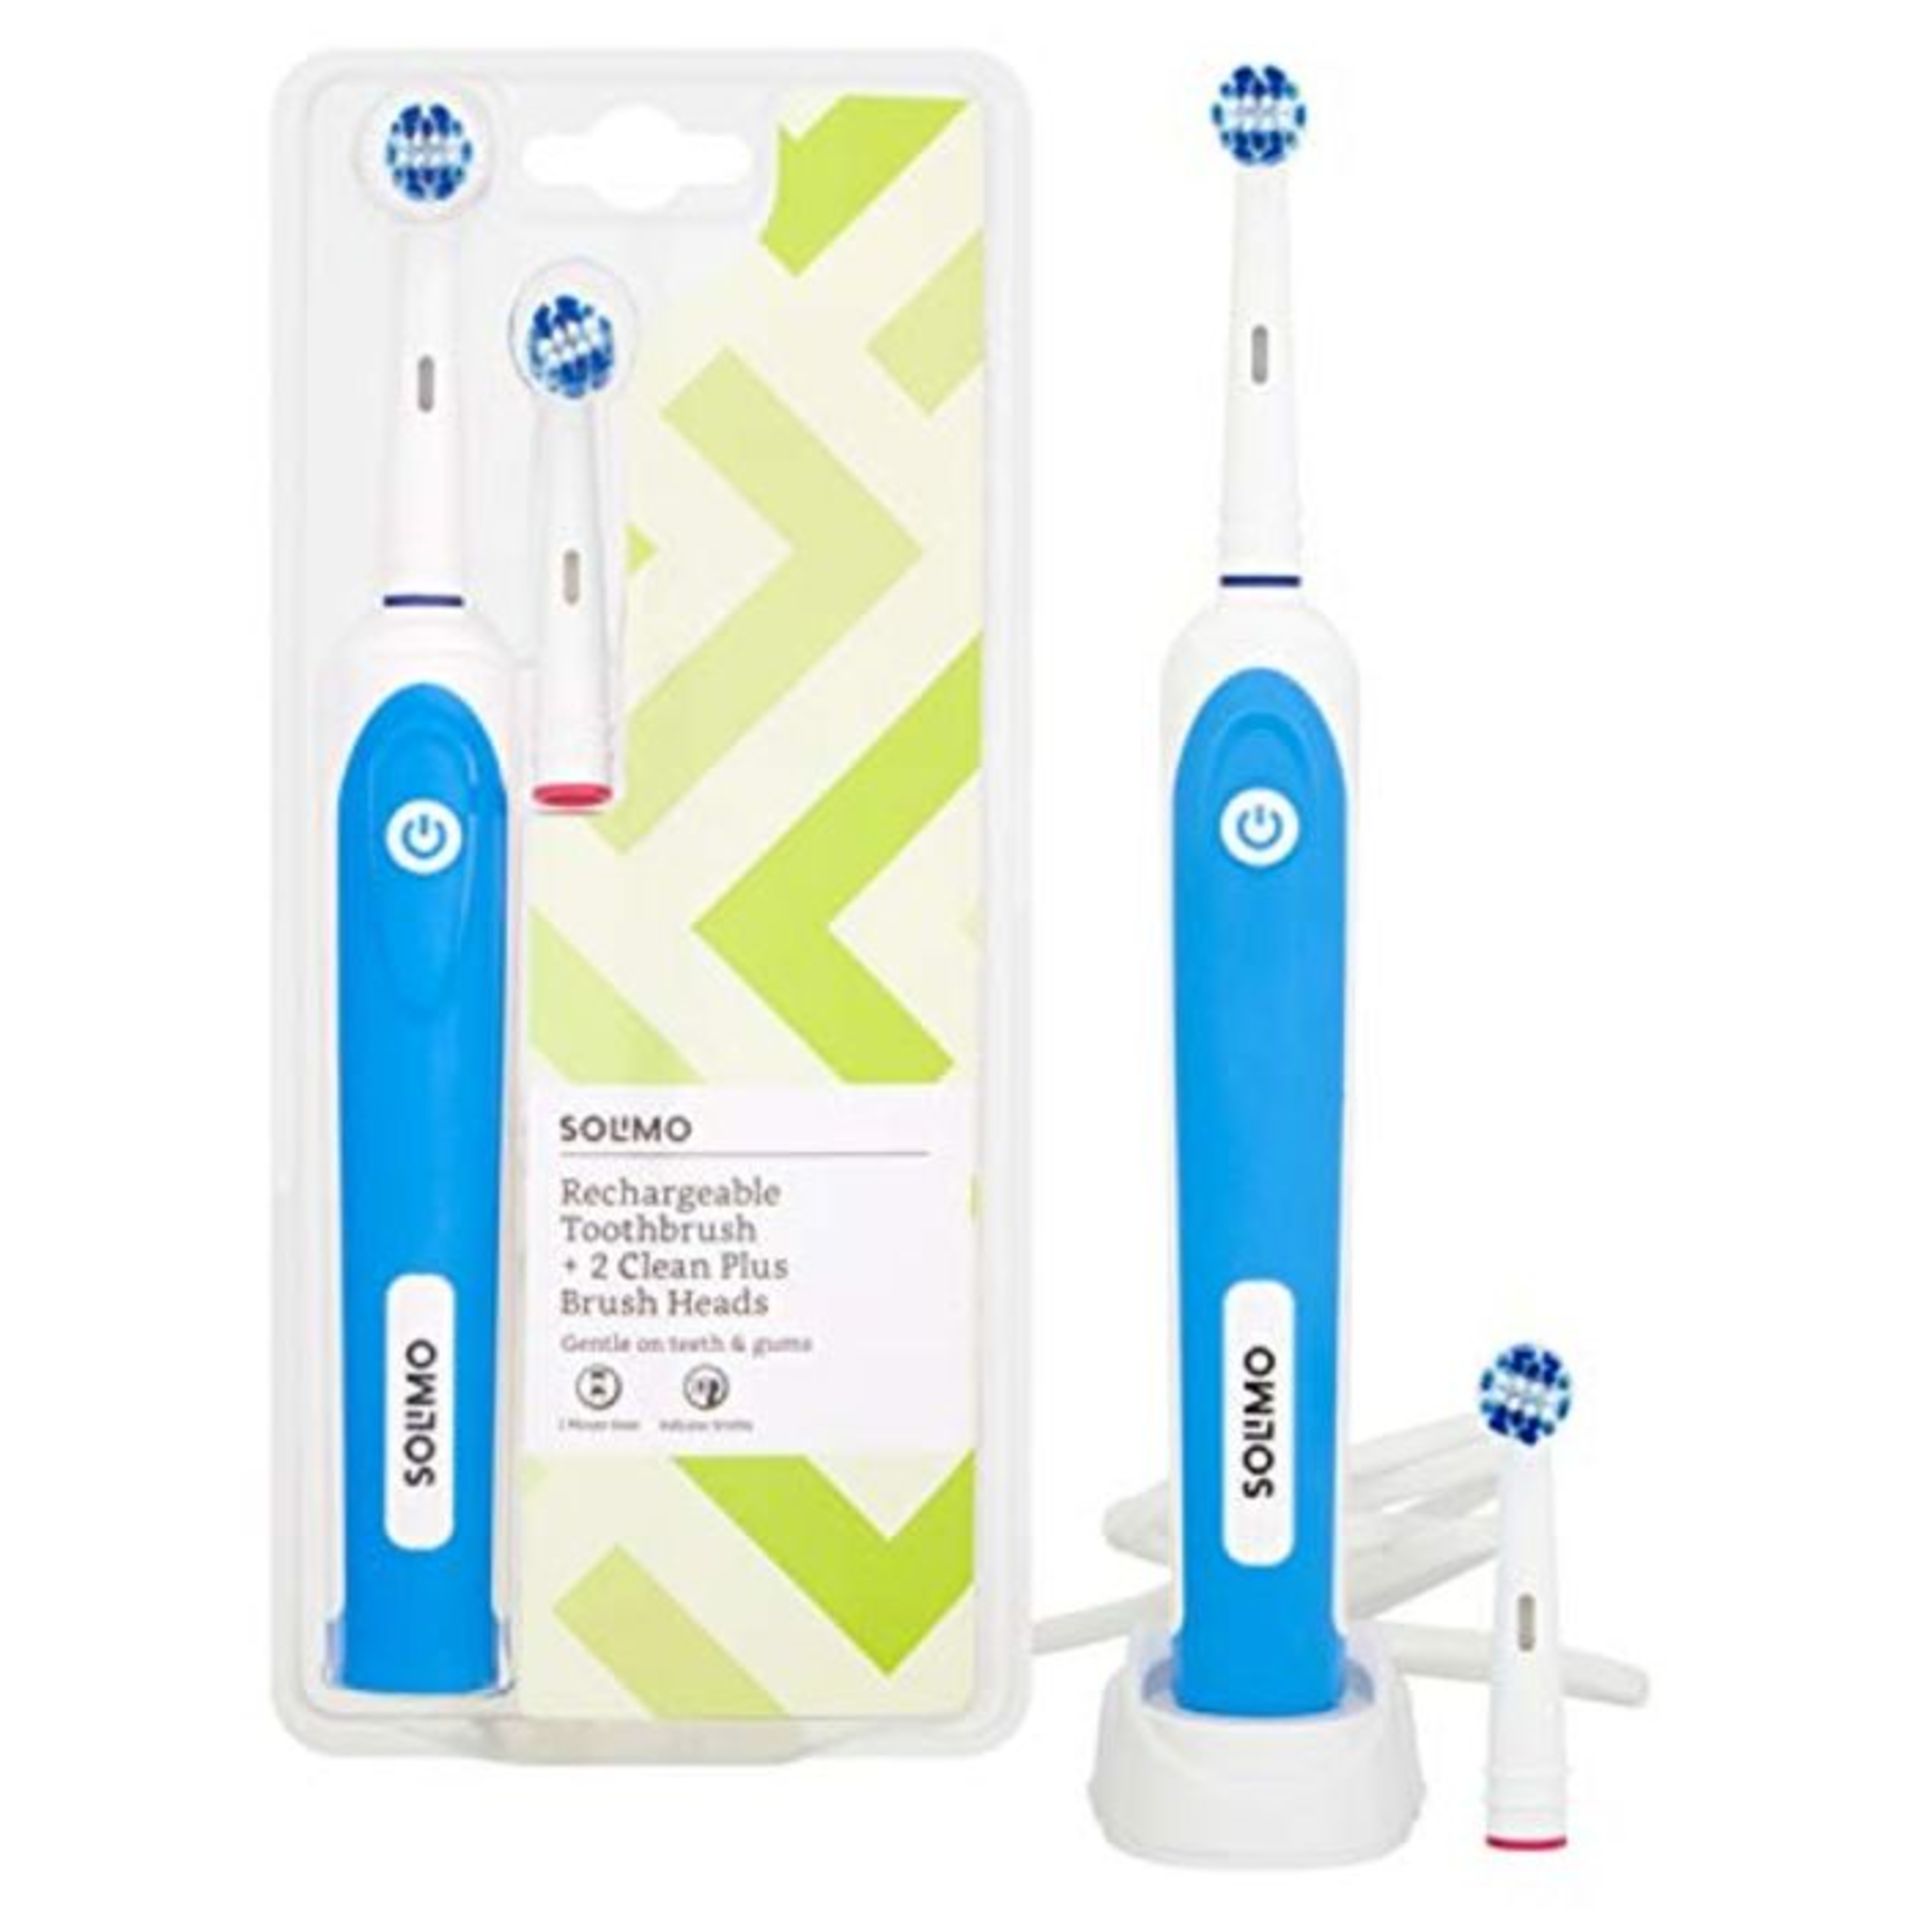 Amazon Brand - Solimo Electric Rechargeable Toothbrush + 2 Clean Plus Brush Heads (wit